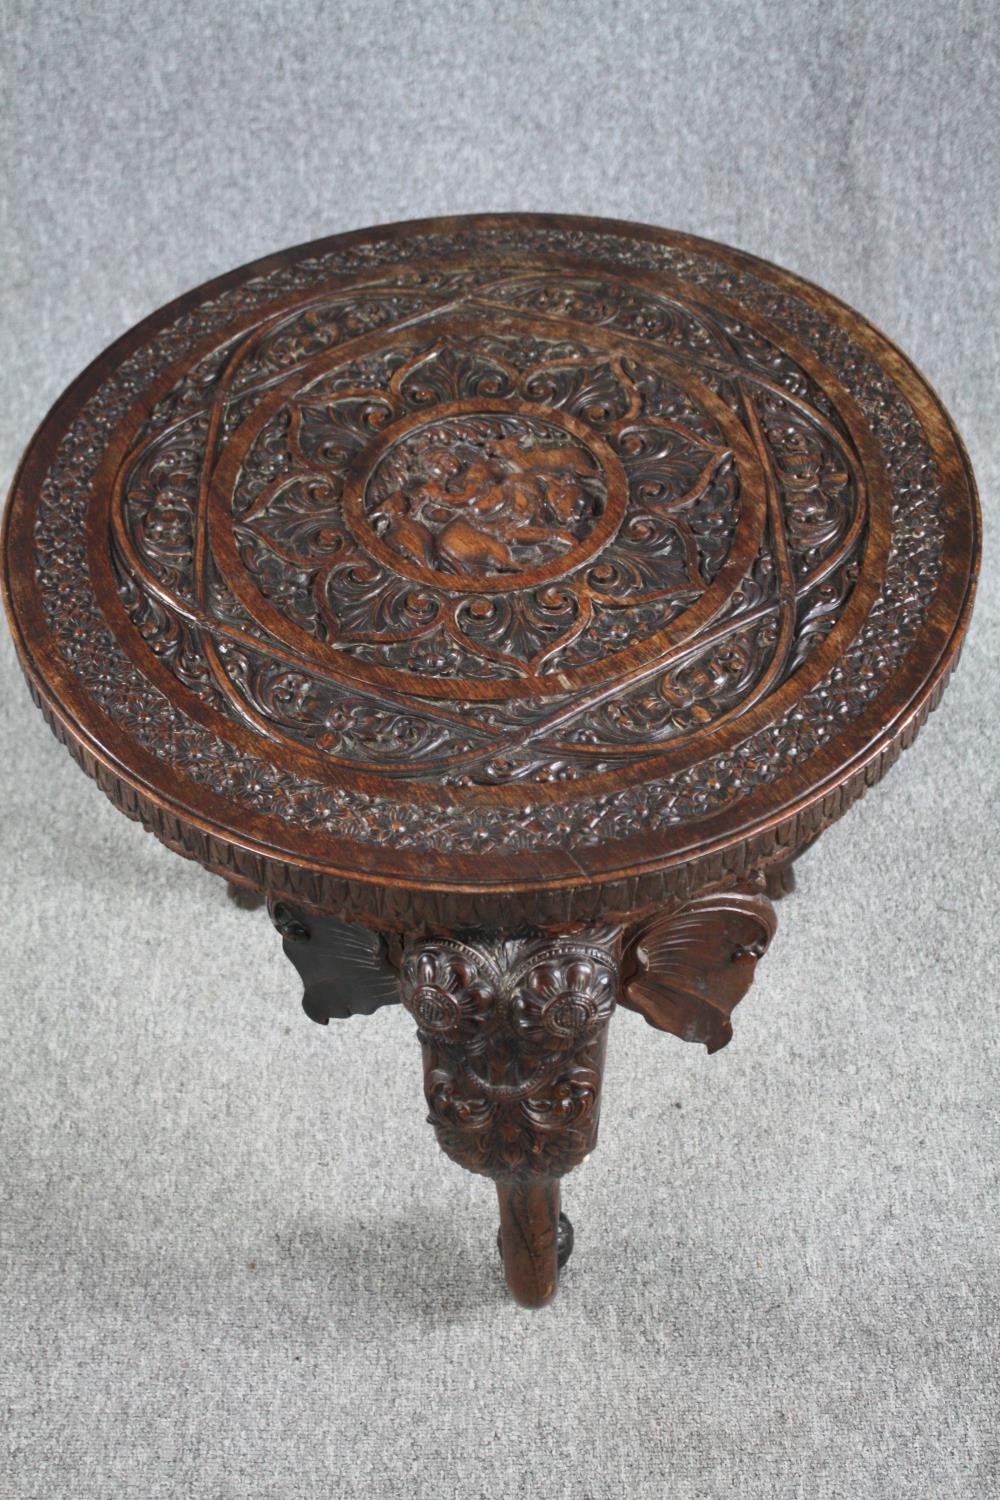 Lamp or occasional table, eastern carved hardwood with elephant supports and bone tusks. H.62 Dia. - Image 2 of 5